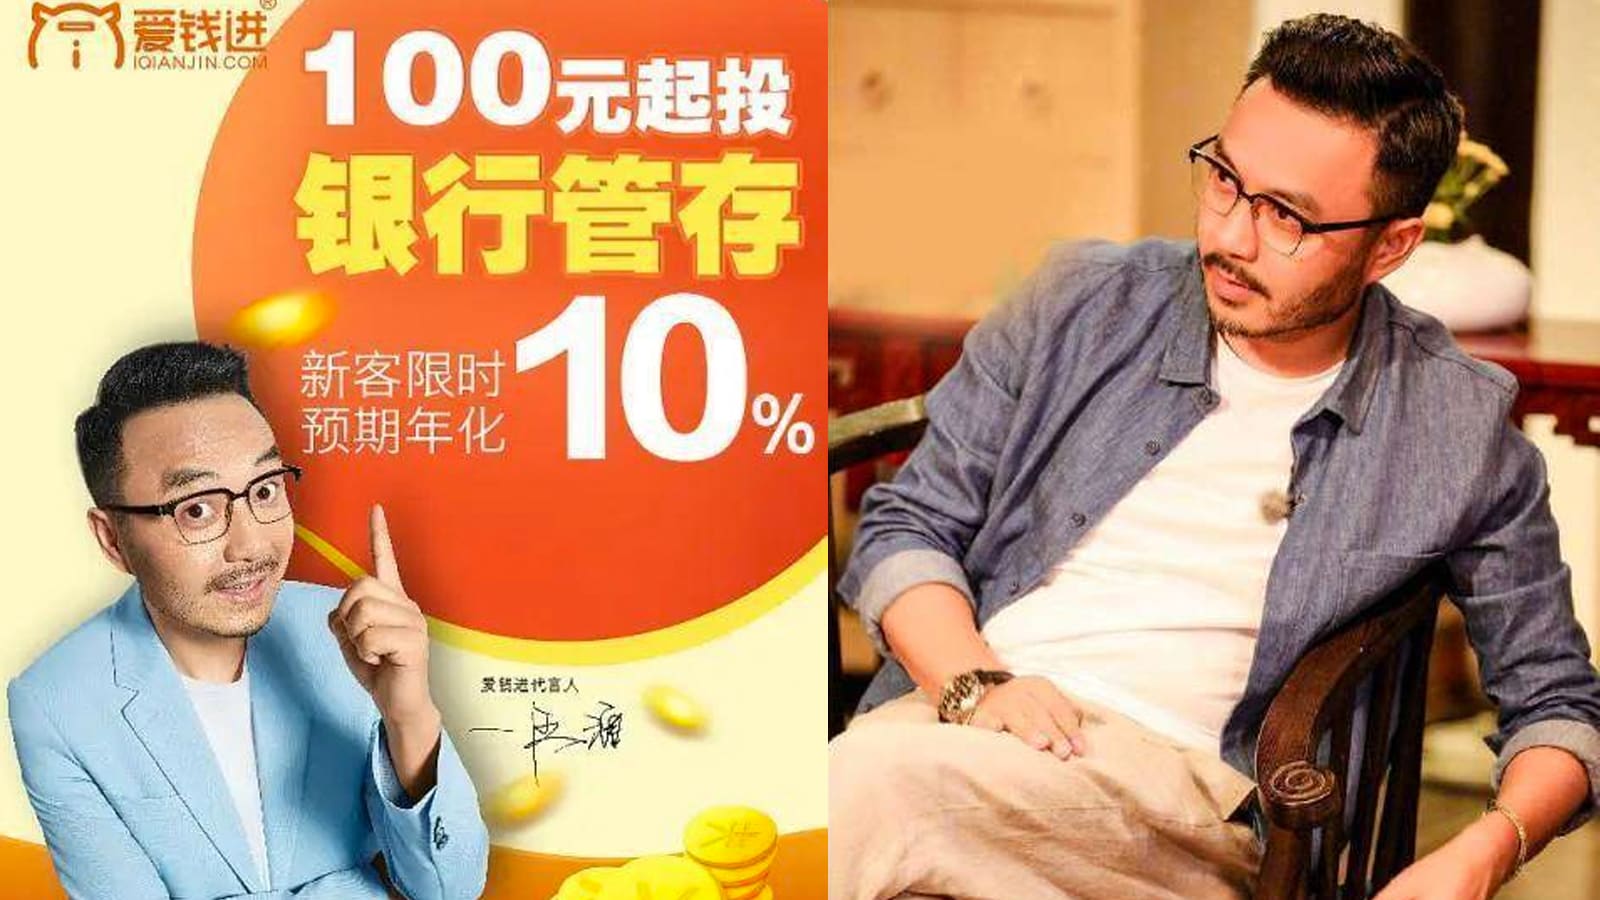 This Chinese Host Was Slammed By Netizens After An Investment App He Endorsed Cheated People Of S$4.5bil